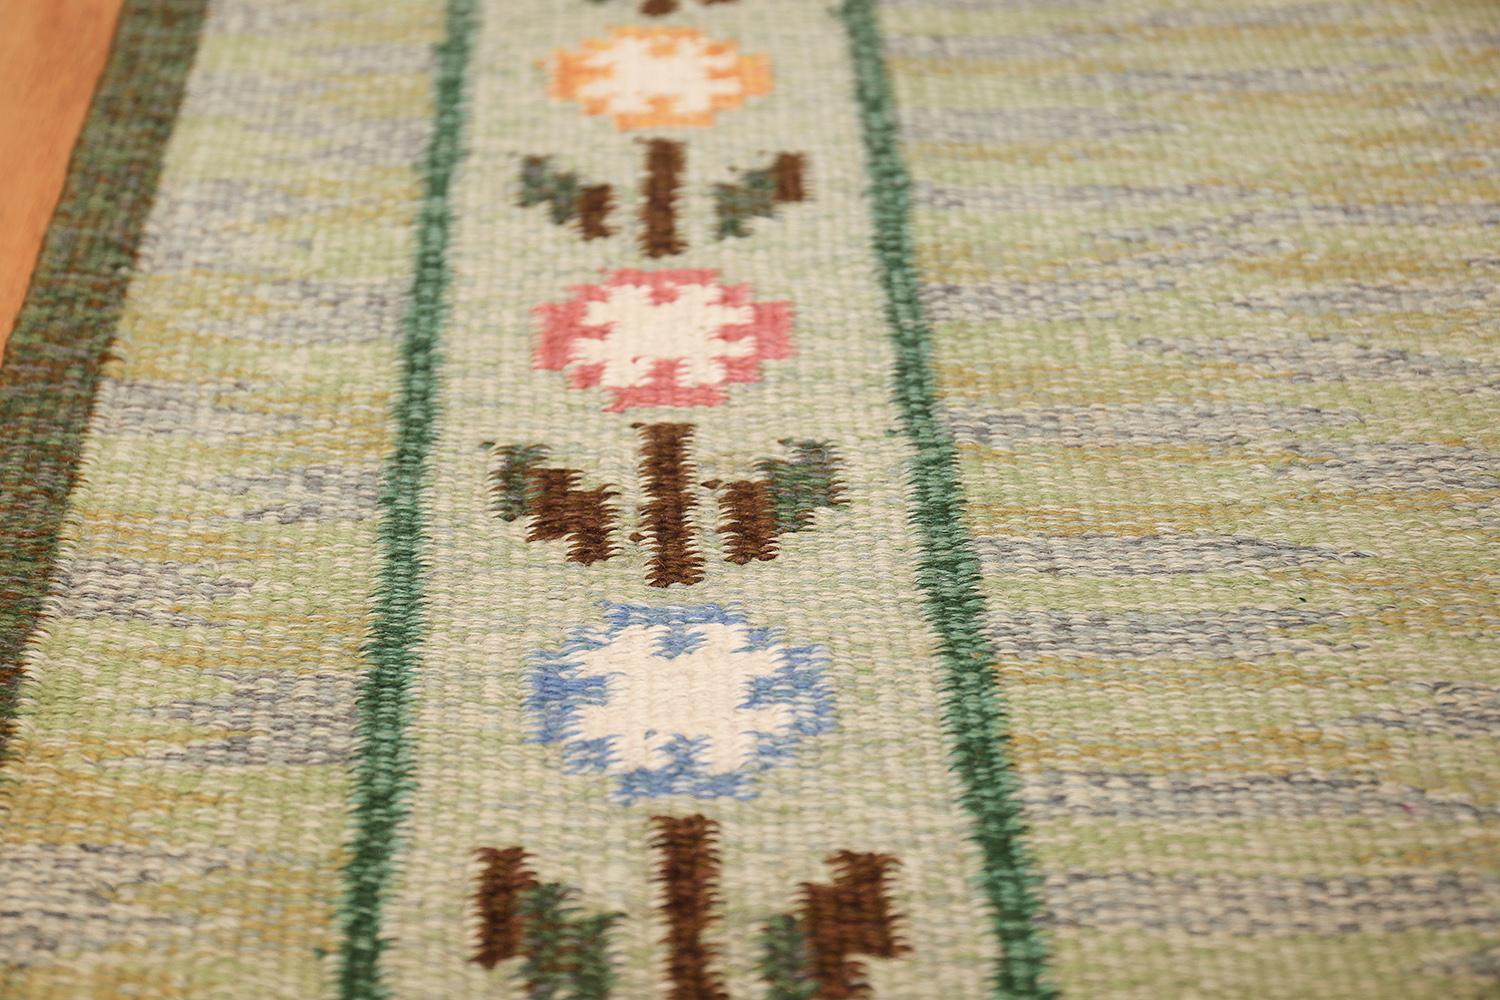 Hand-Woven Vintage Swedish Kilim. Size: 5 ft 5 in x 8 ft (1.65 m x 2.44 m)